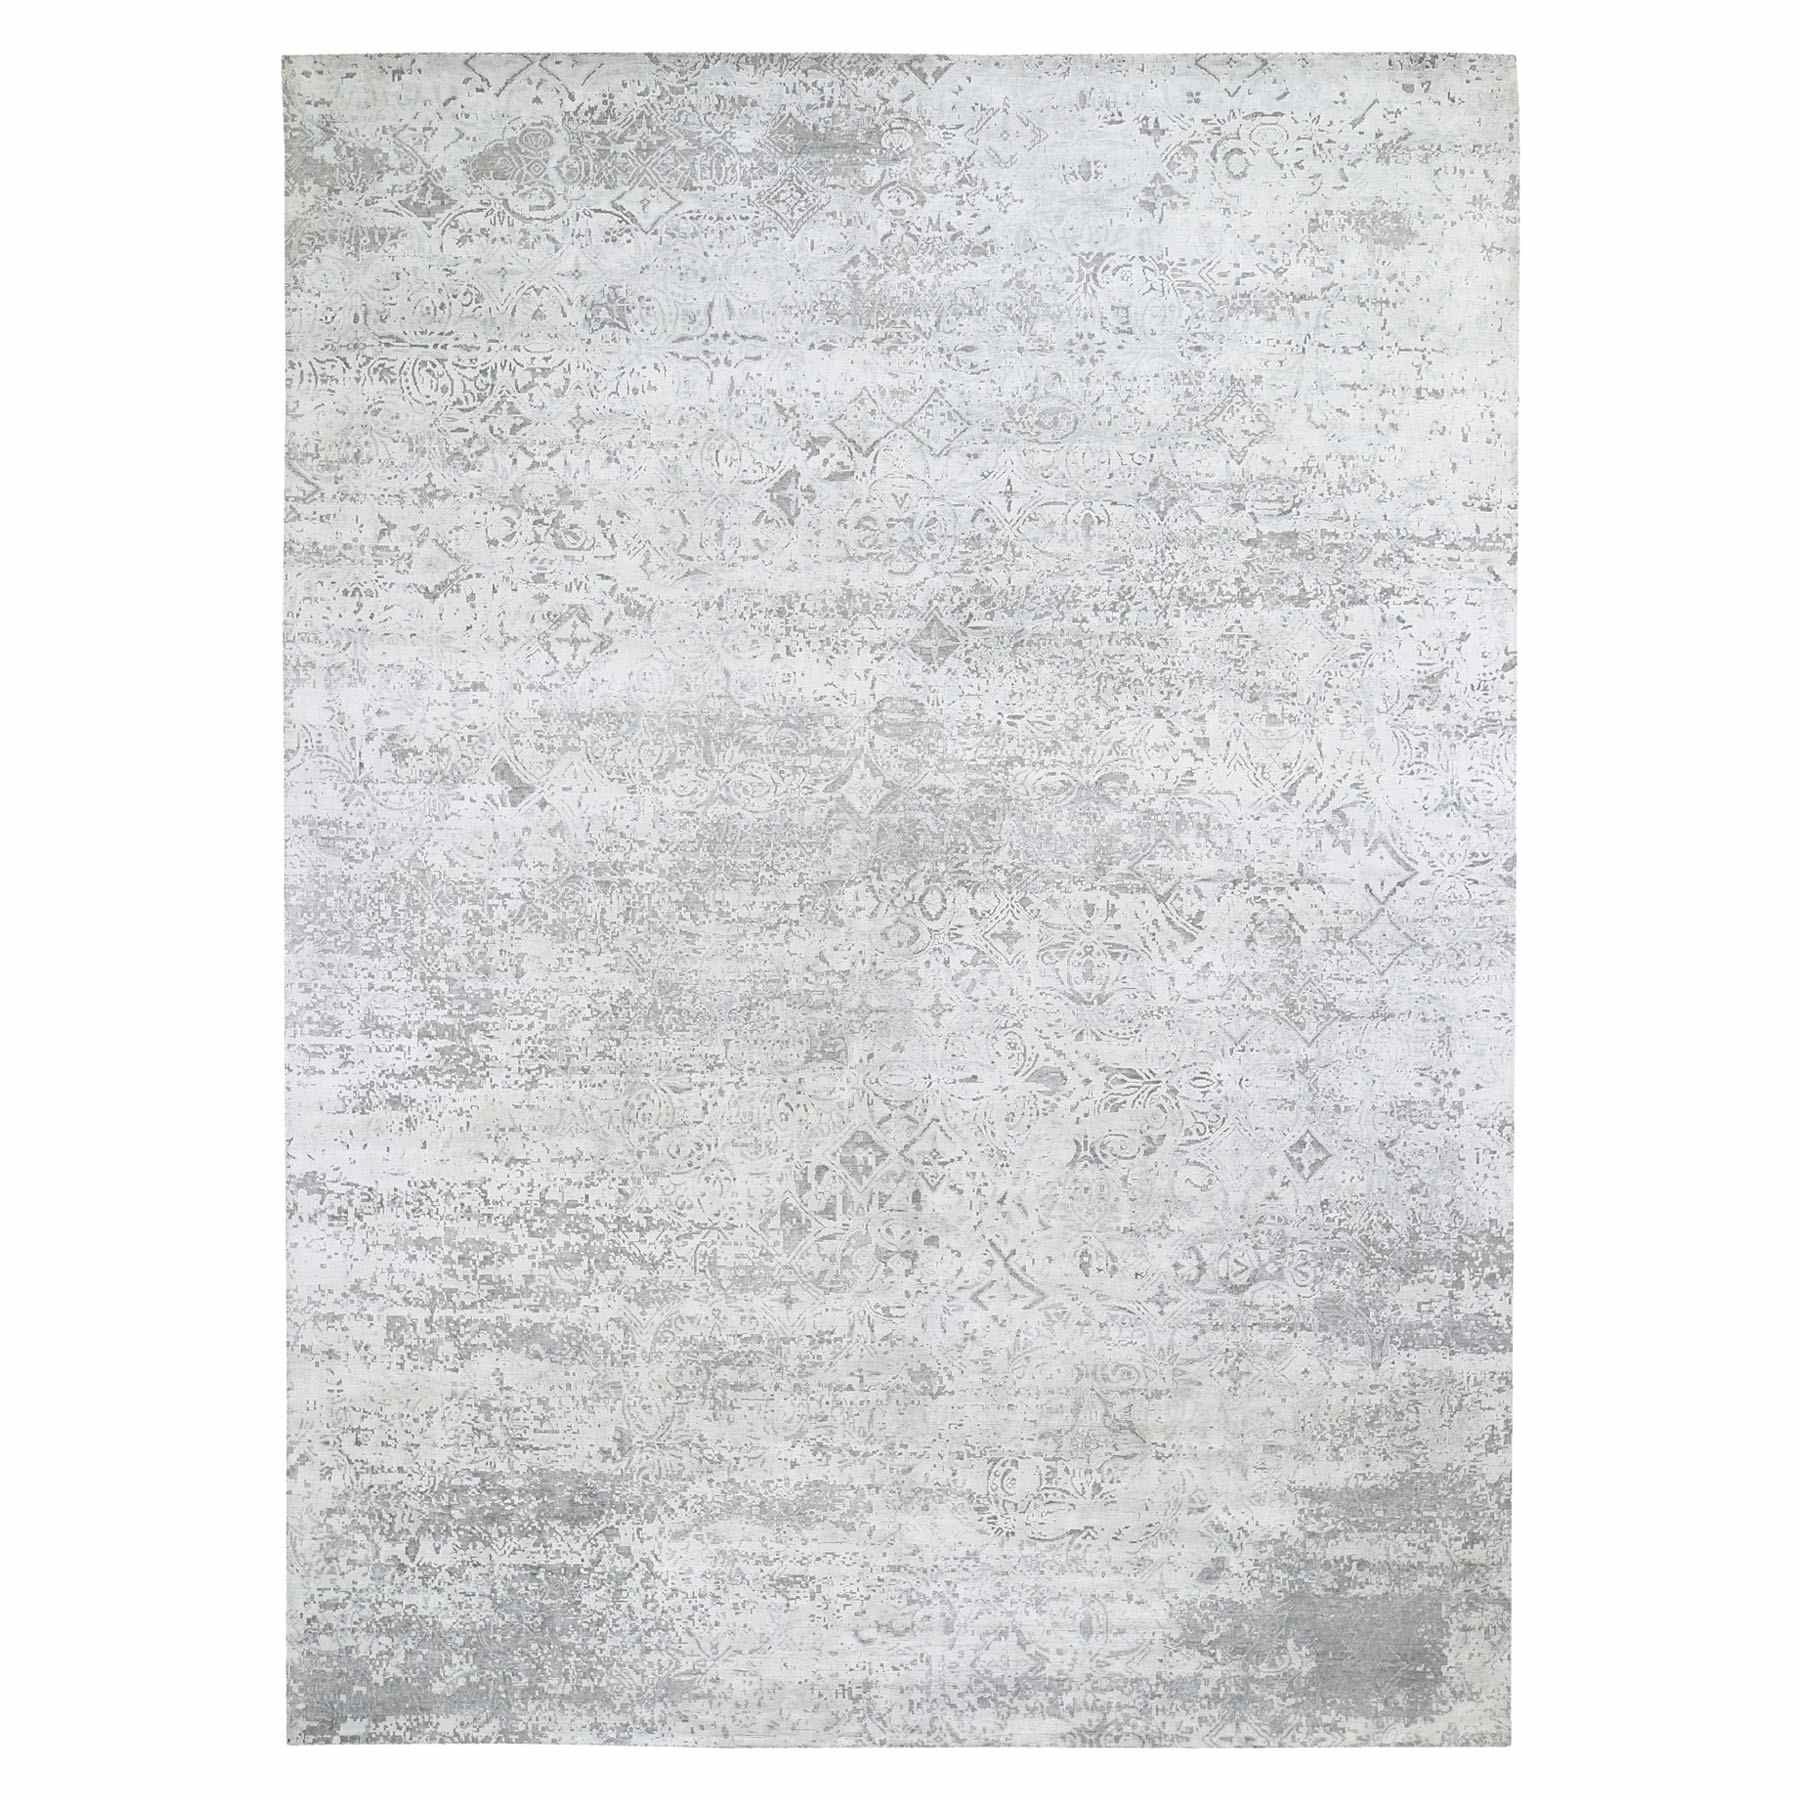 Wool-and-Silk-Hand-Knotted-Rug-296240